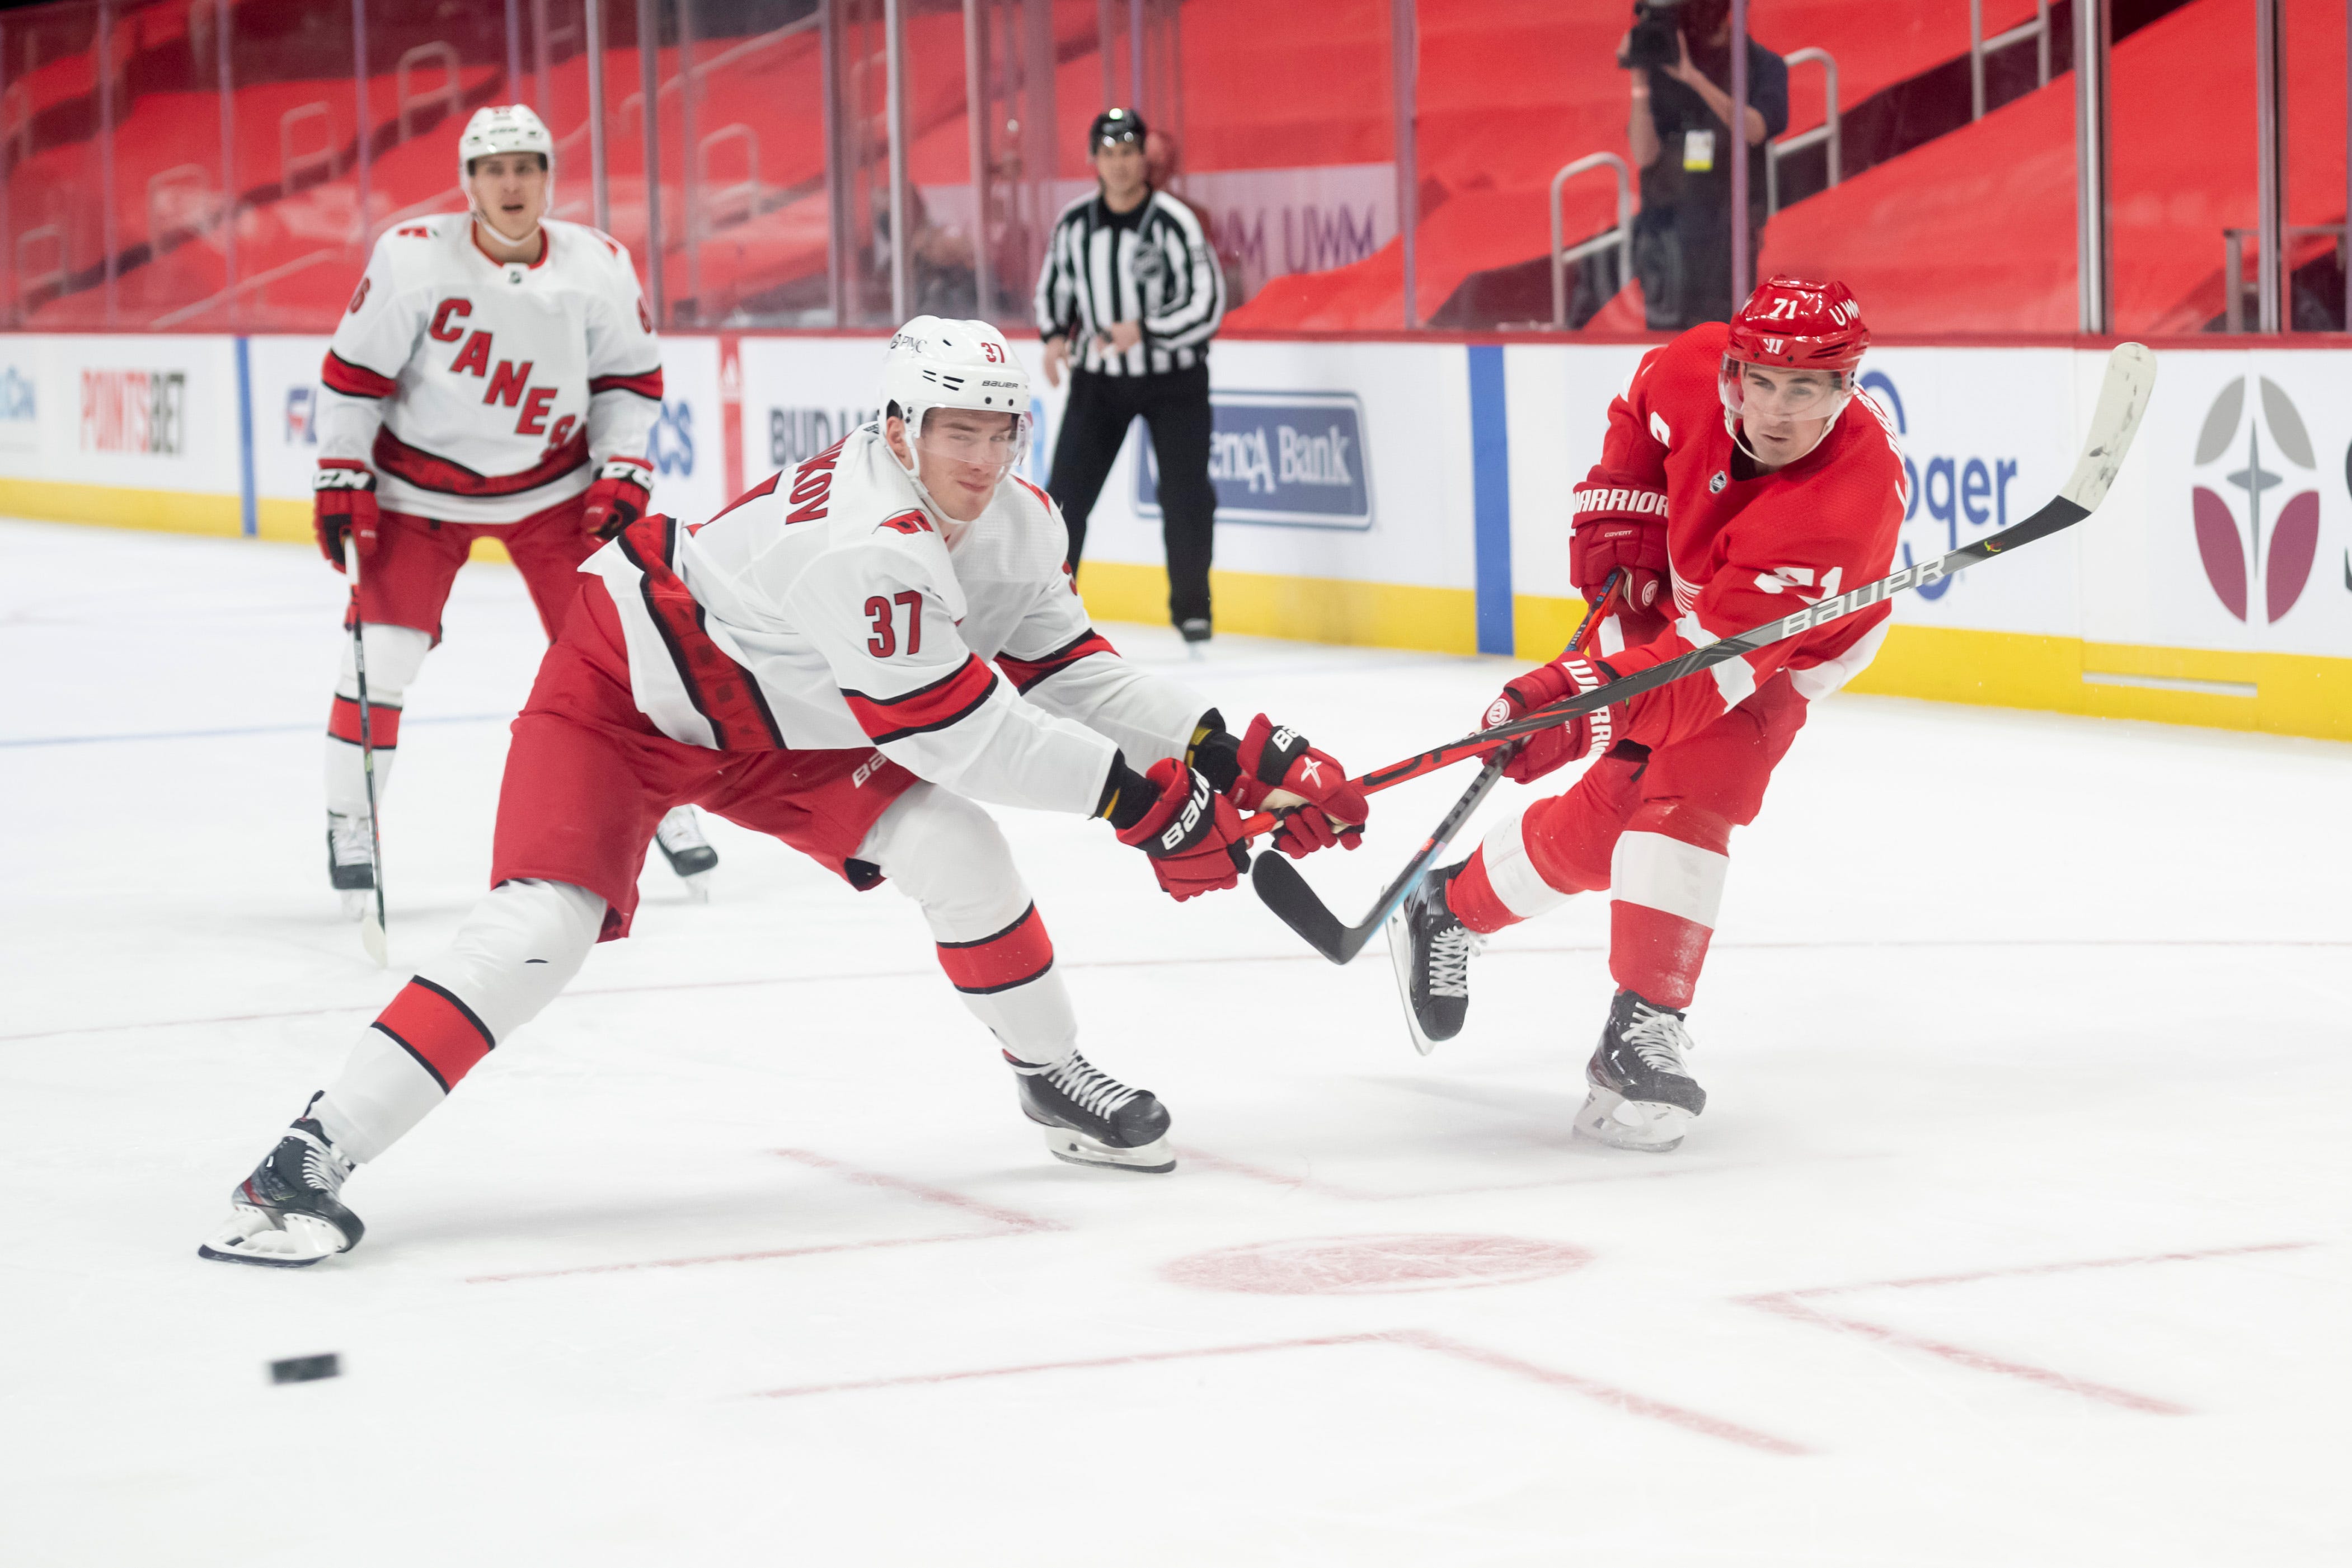 Detroit center Dylan Larkin shoots the puck while being defended by Carolina right wing Andrei Svechnikov in the first period.